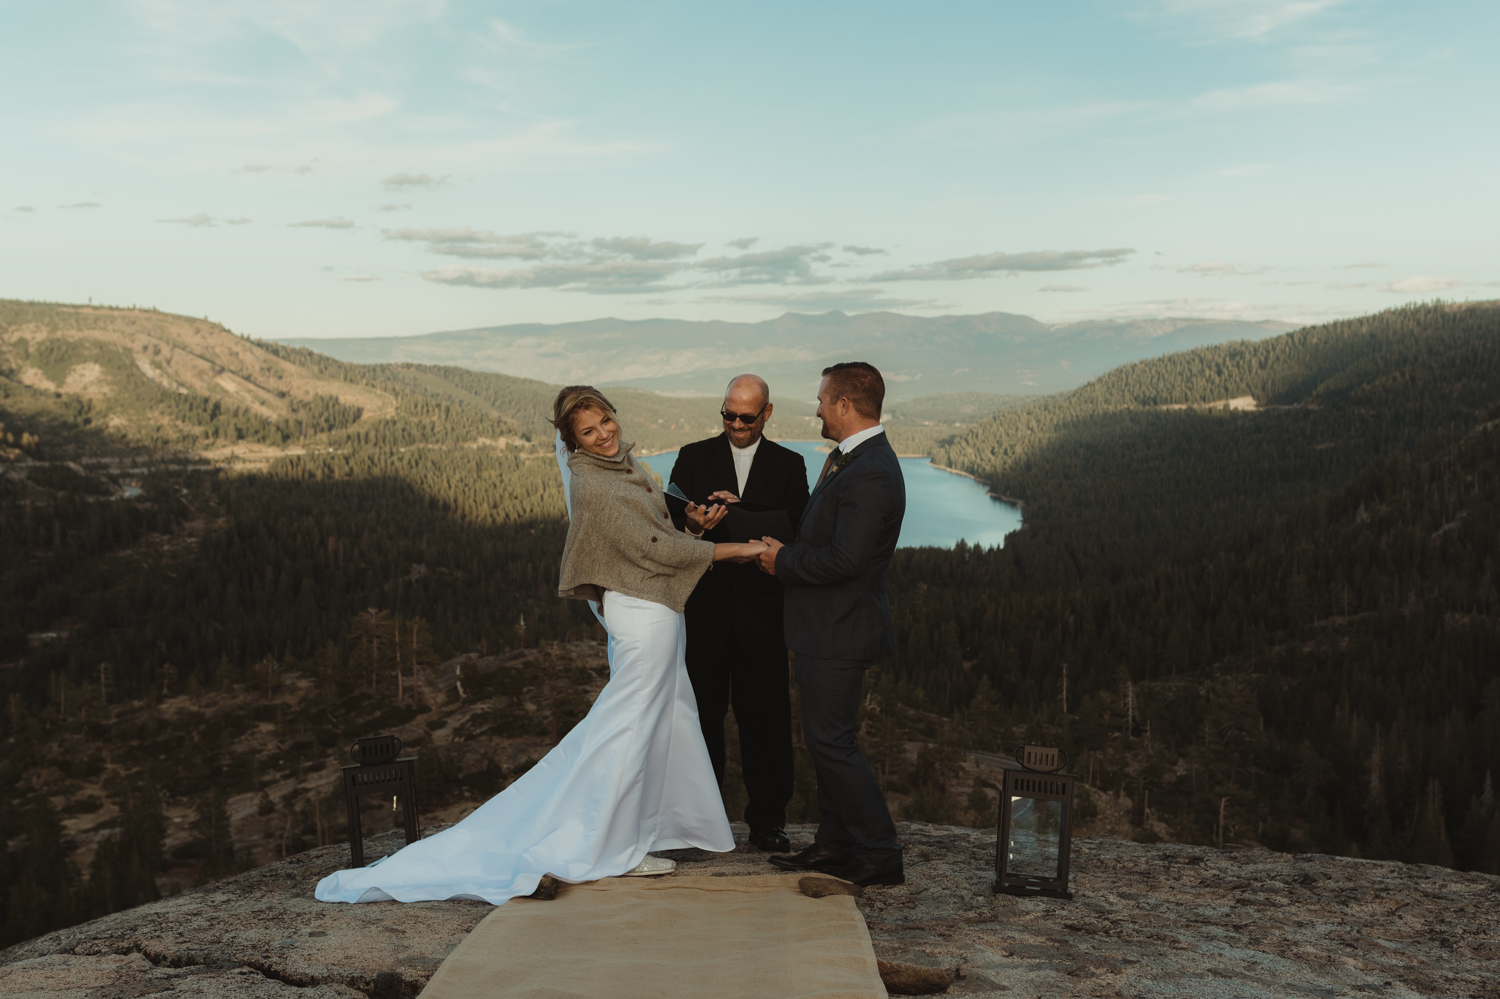 North Lake Tahoe wedding bride smiling during her ceremony photo